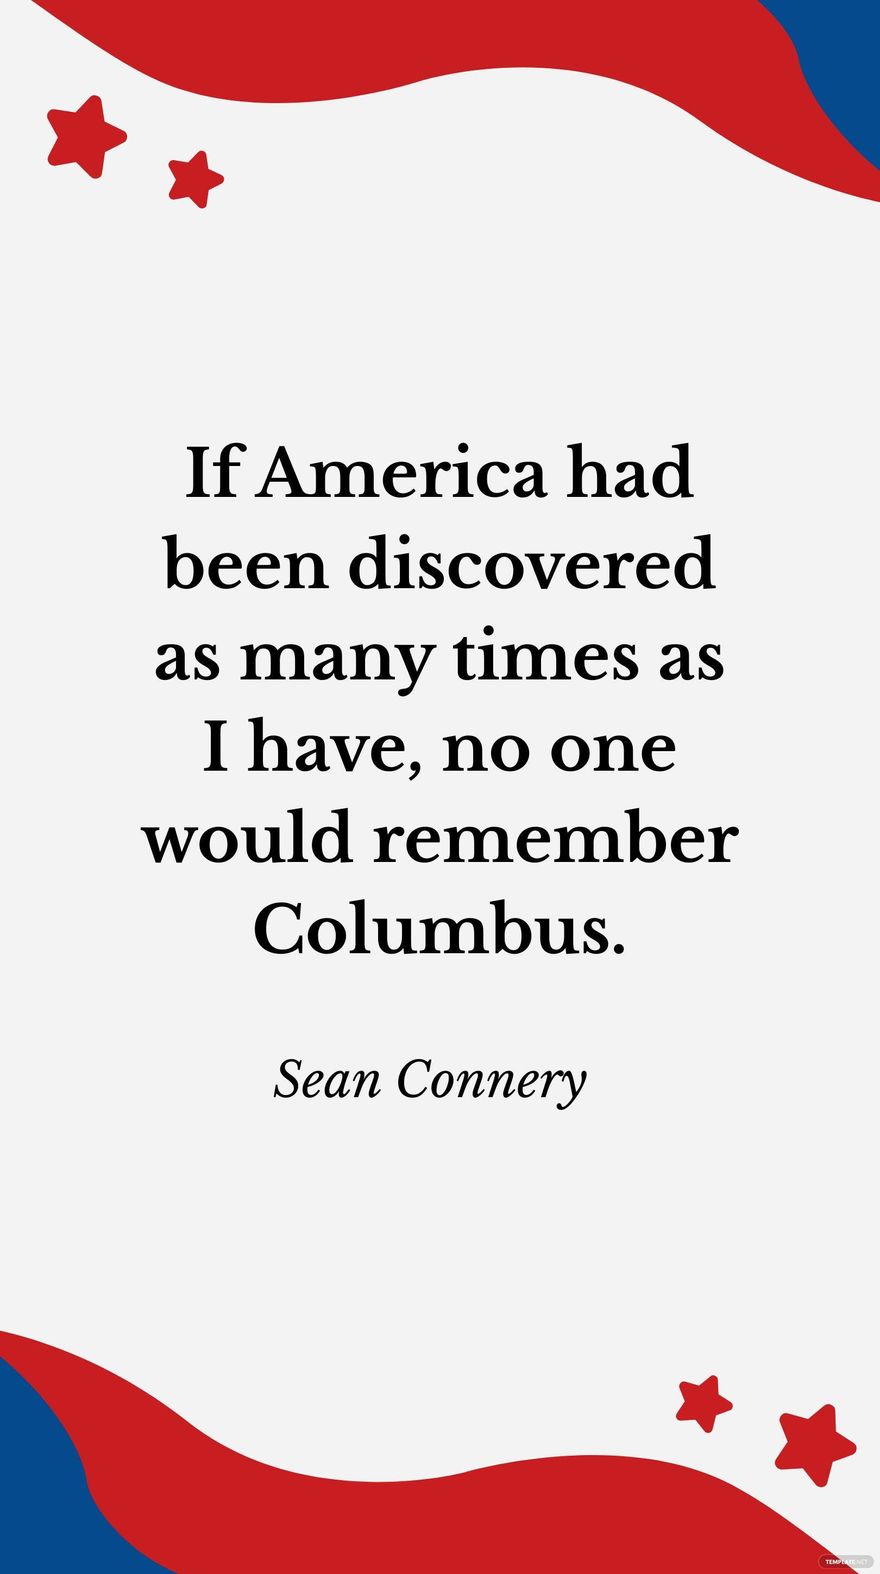 Sean Connery- If America had been discovered as many times as I have, no one would remember Columbus. in JPG